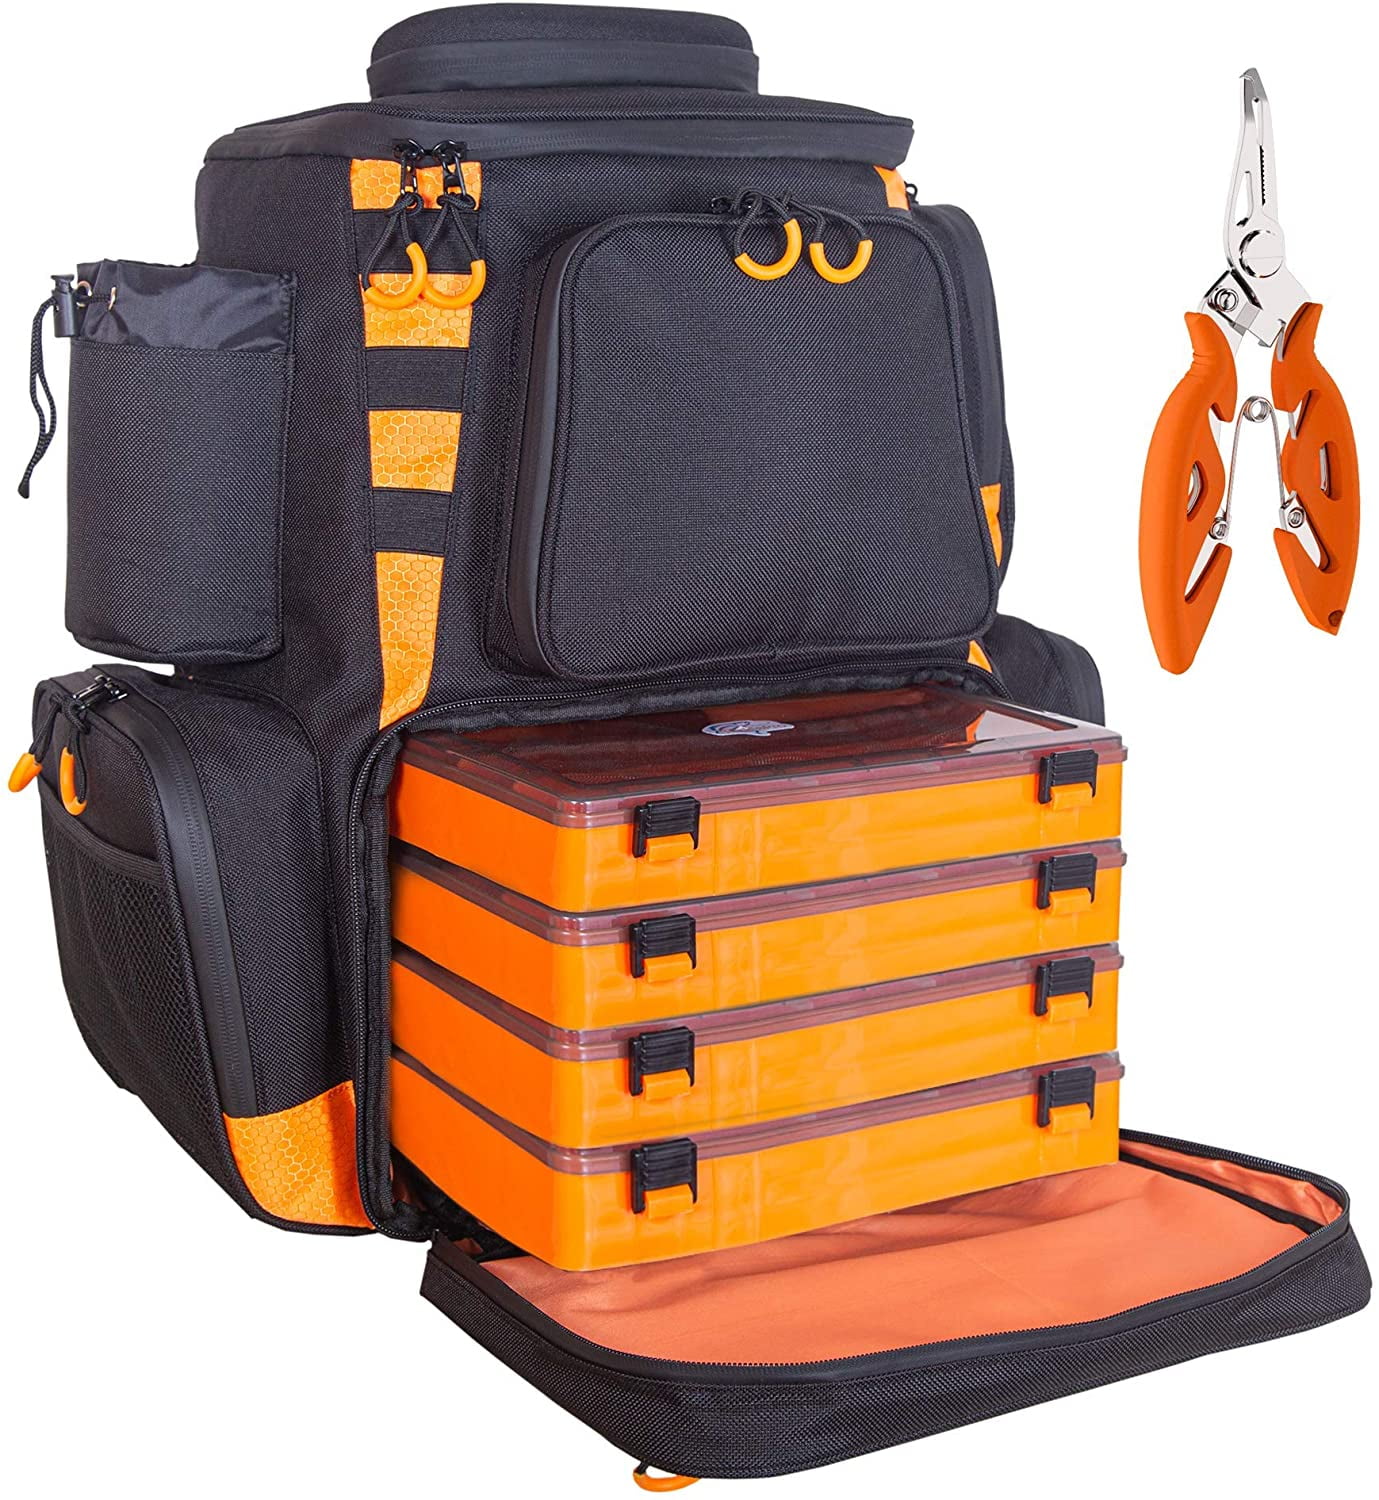 Large Rolling Fishing Backpack - Cooler Compartment Fishing Rod